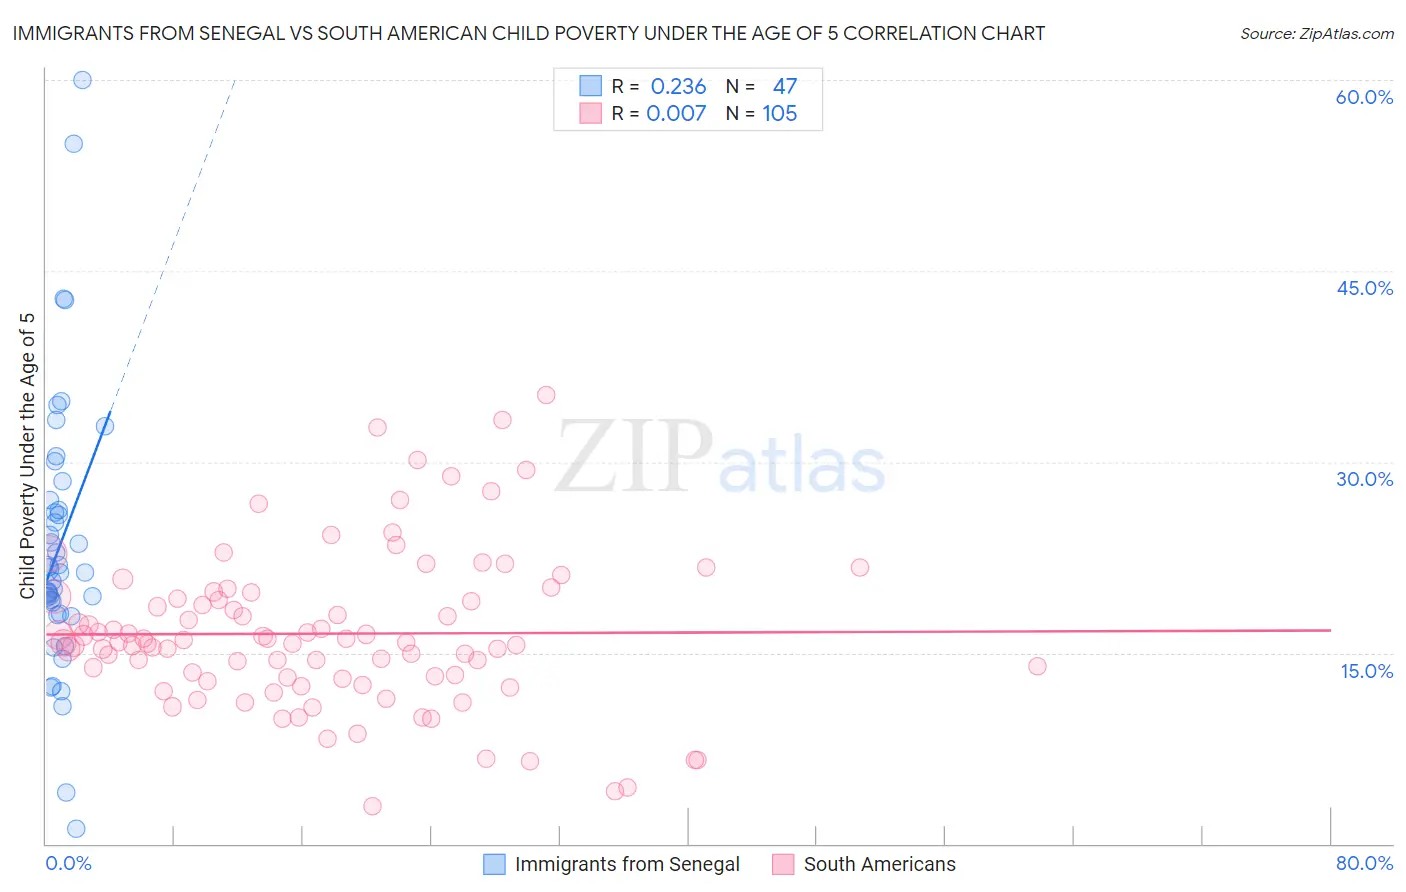 Immigrants from Senegal vs South American Child Poverty Under the Age of 5